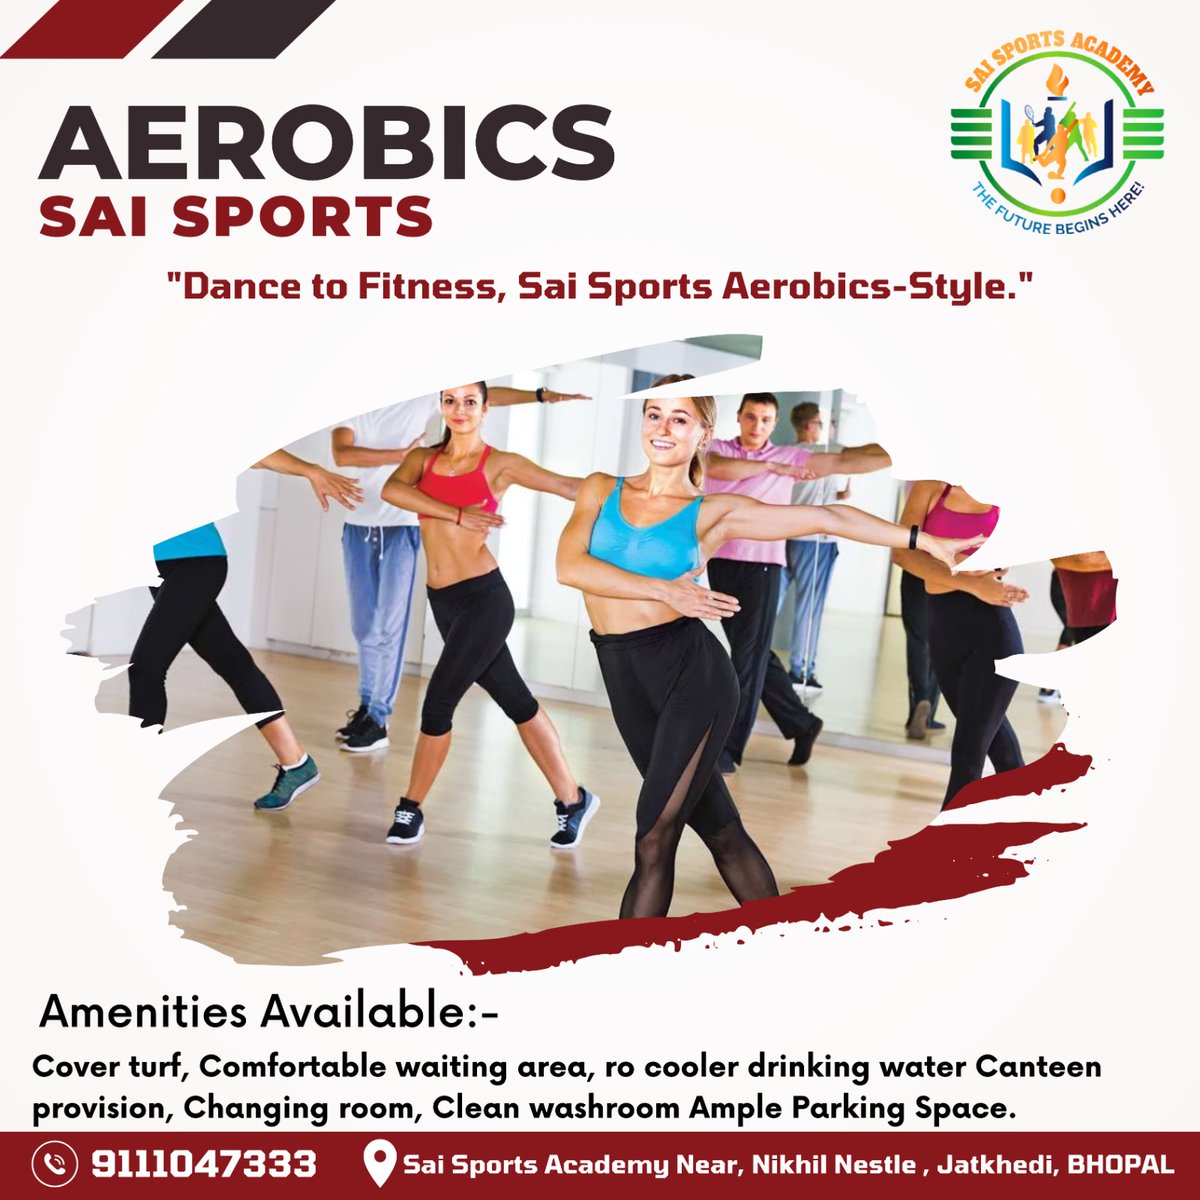 Sweat, Smile, Repeat 🏋️‍♀️💪 with Sai Sports Academy Aerobics! Get ready to groove, move and improve your fitness game! 💃🔥🔝
Are you ready to dance away the calories? 🕺💃 Join our energetic community, where every step is a celebration! 🎉🎶💥

#SaiSportsAcademy #AerobicsClass